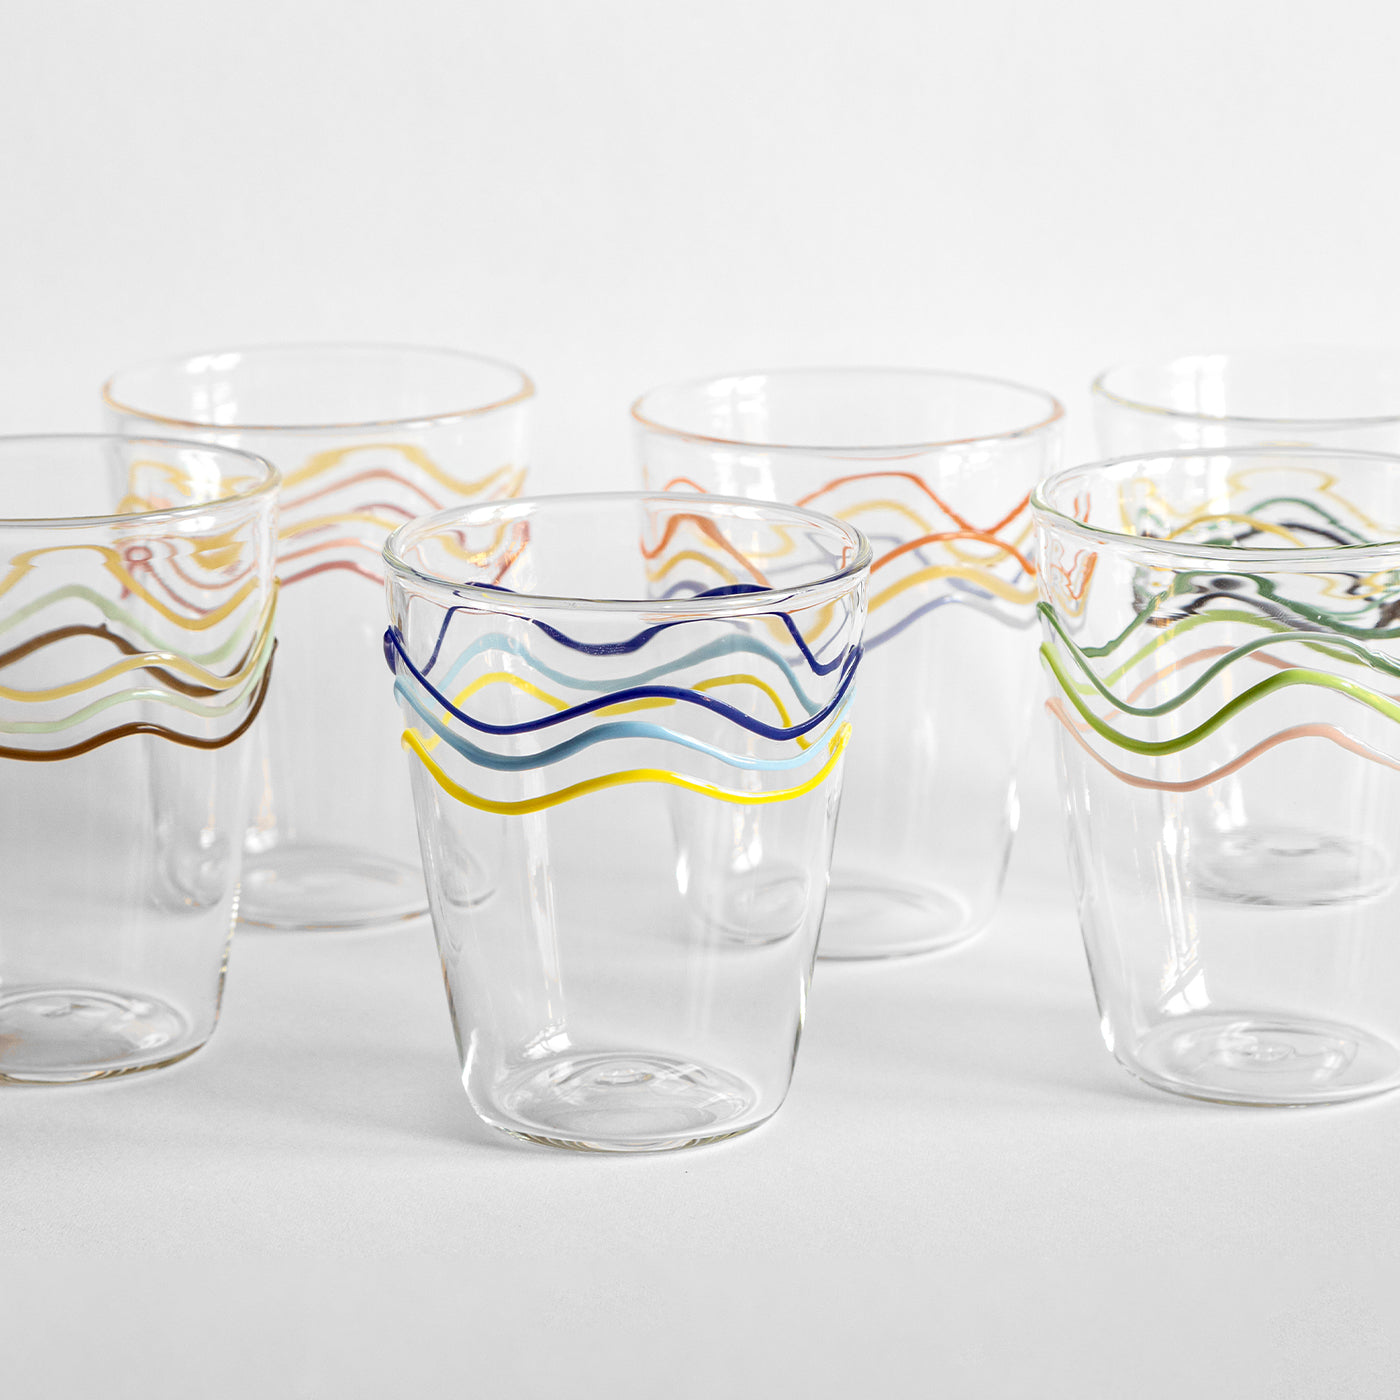 Cabinet De Curiosités Set Of 6 Water Glasses With Colored Waves - Alternative view 1